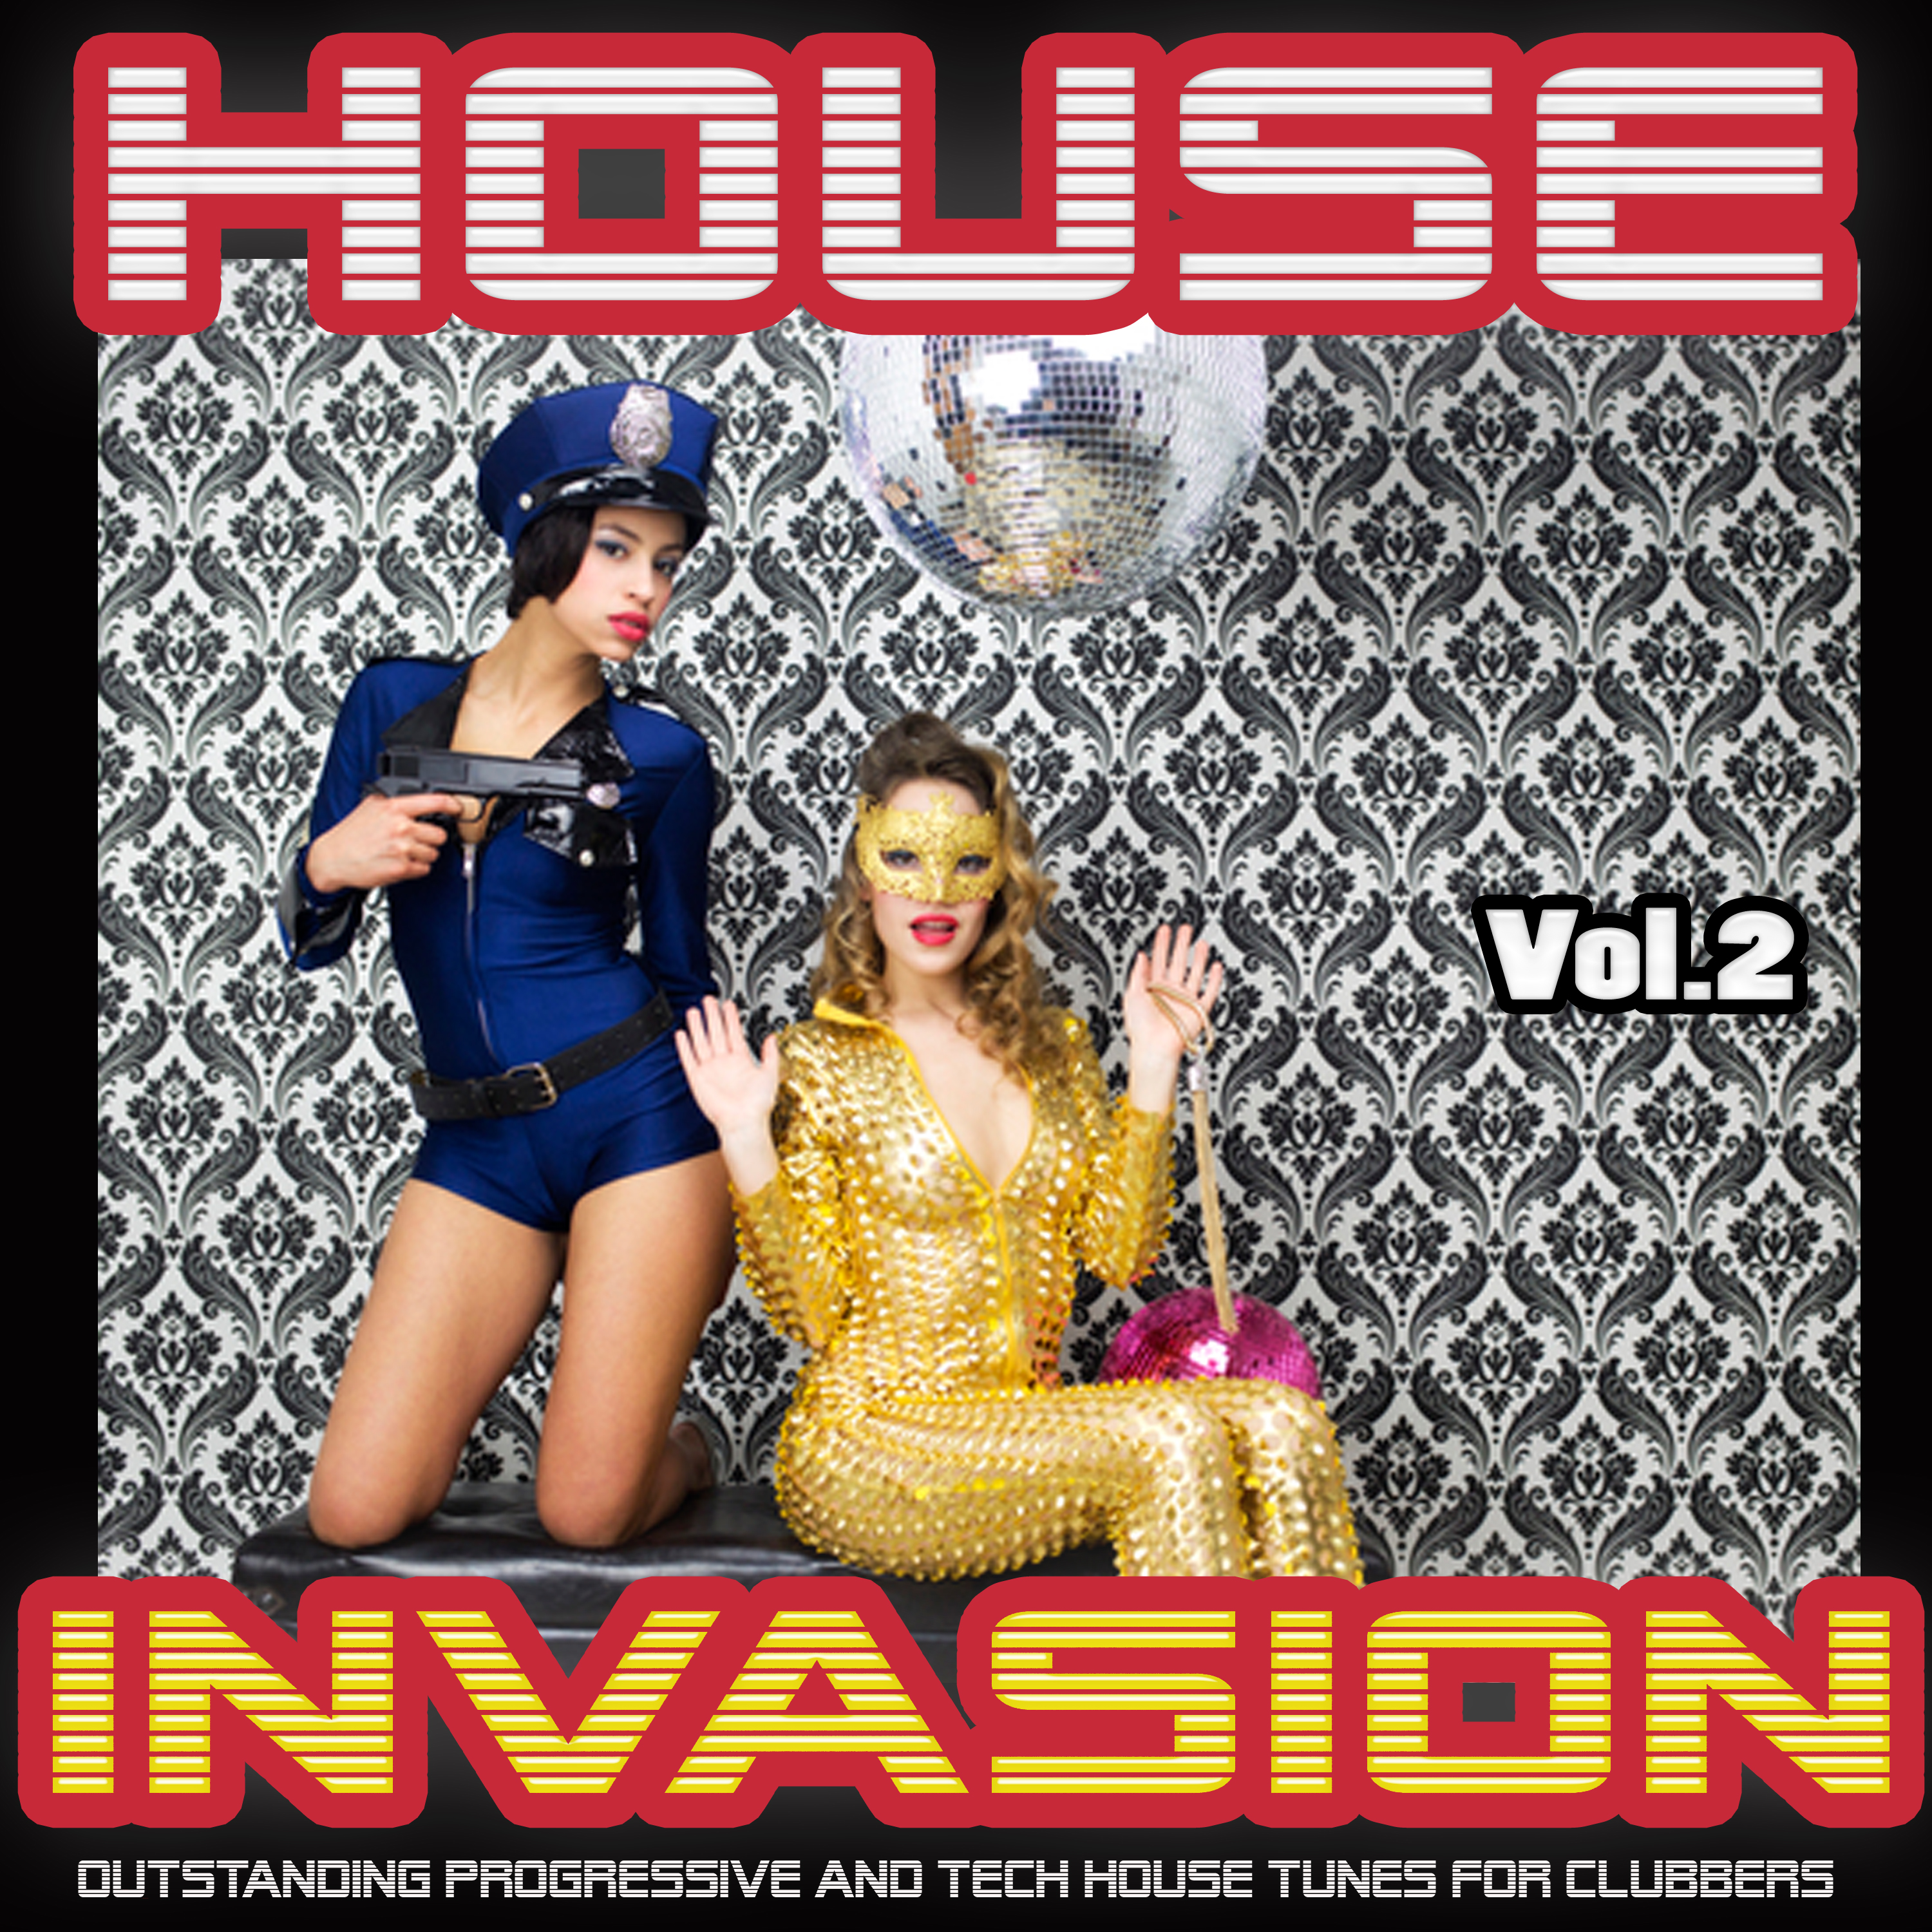 House Invasion, Vol. 2 - Outstanding Progressive and Tech House Tunes for Clubbers